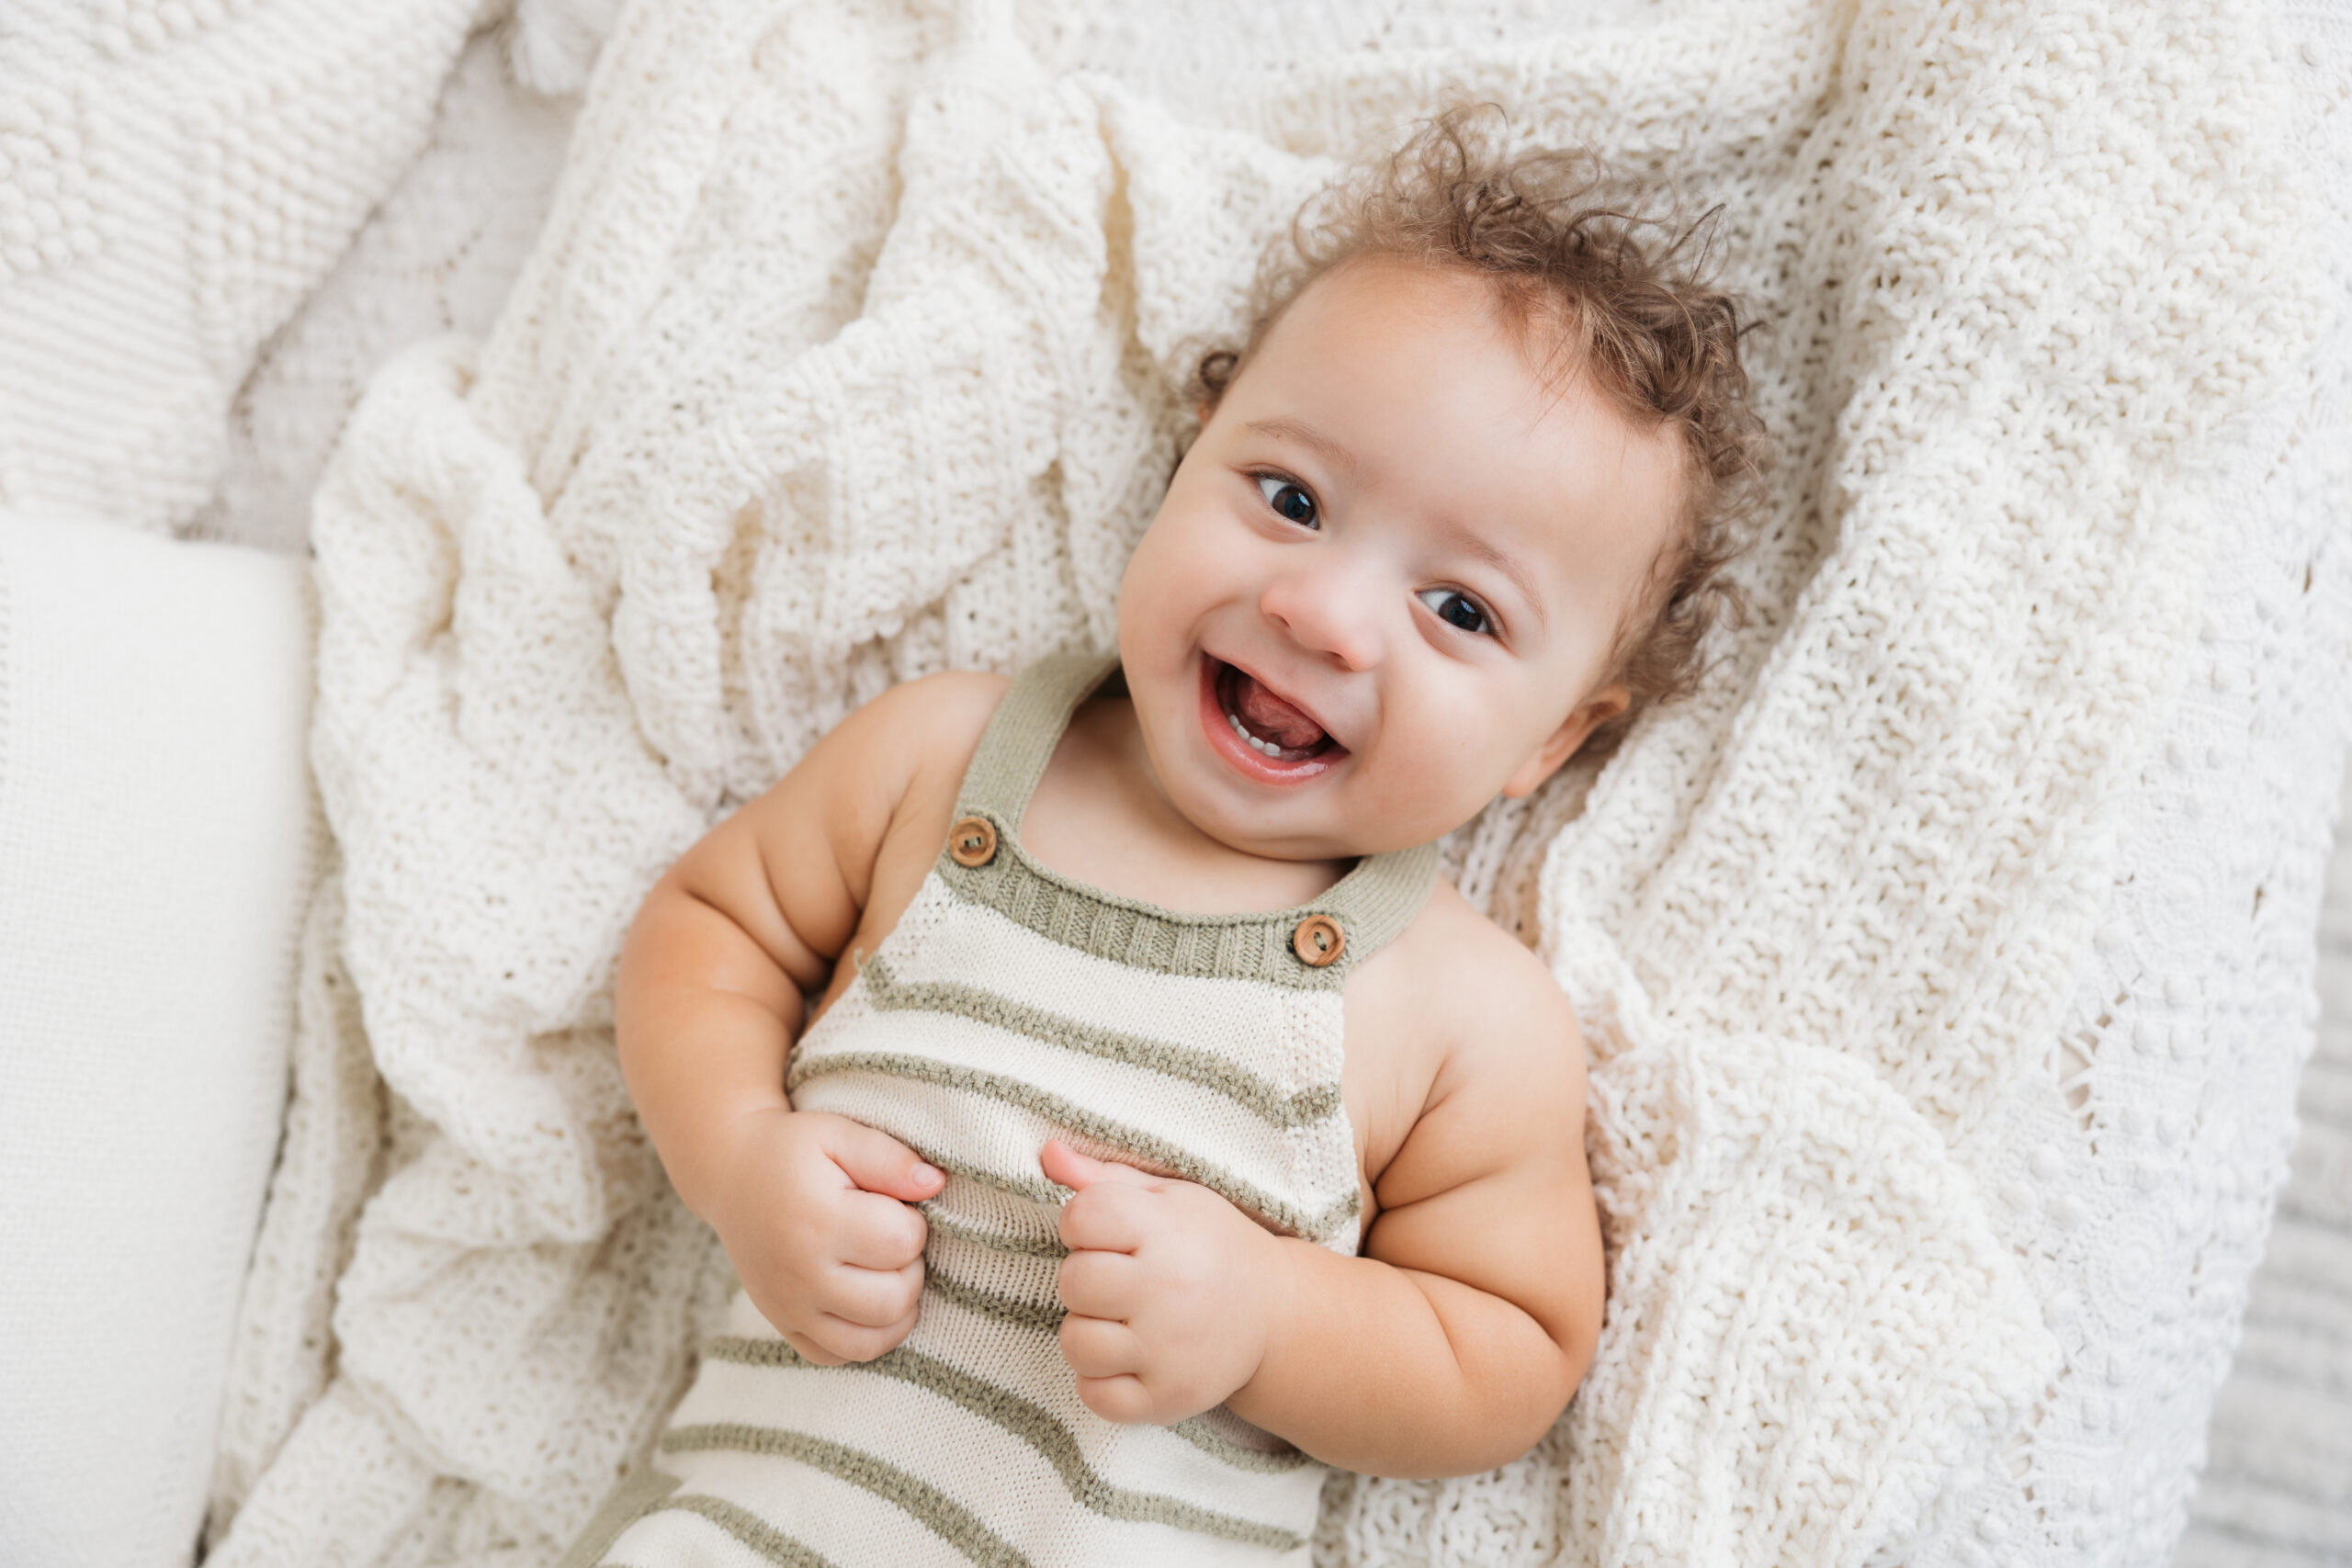 A cheerful baby with curly hair, wearing a striped onesie, lies on a white knit blanket, laughing joyfully.